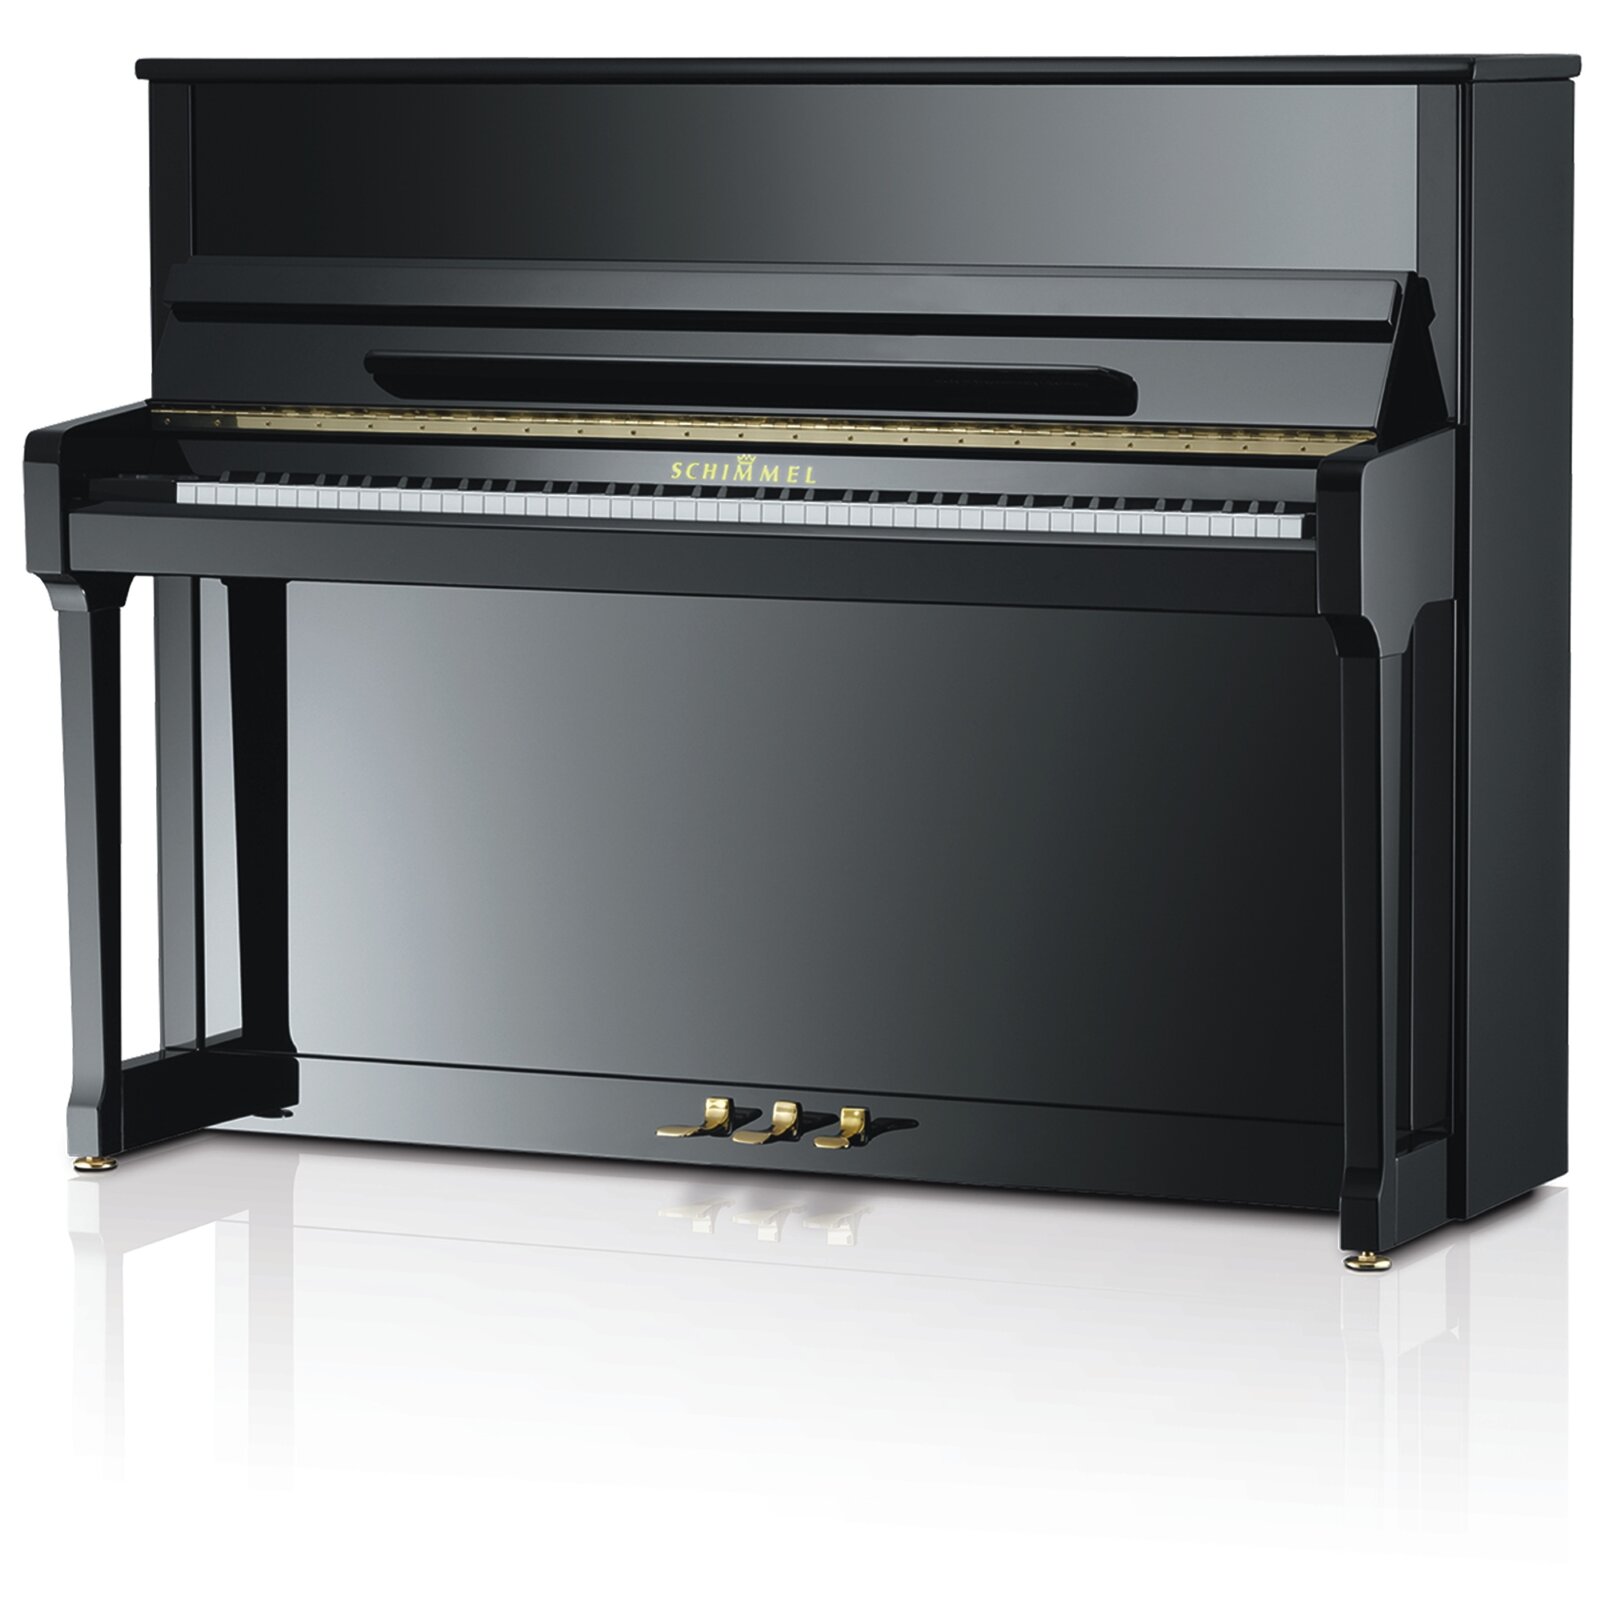 Schimmel C116 Tradition Classic Glossy black + TwinTone silencer system : photo 1